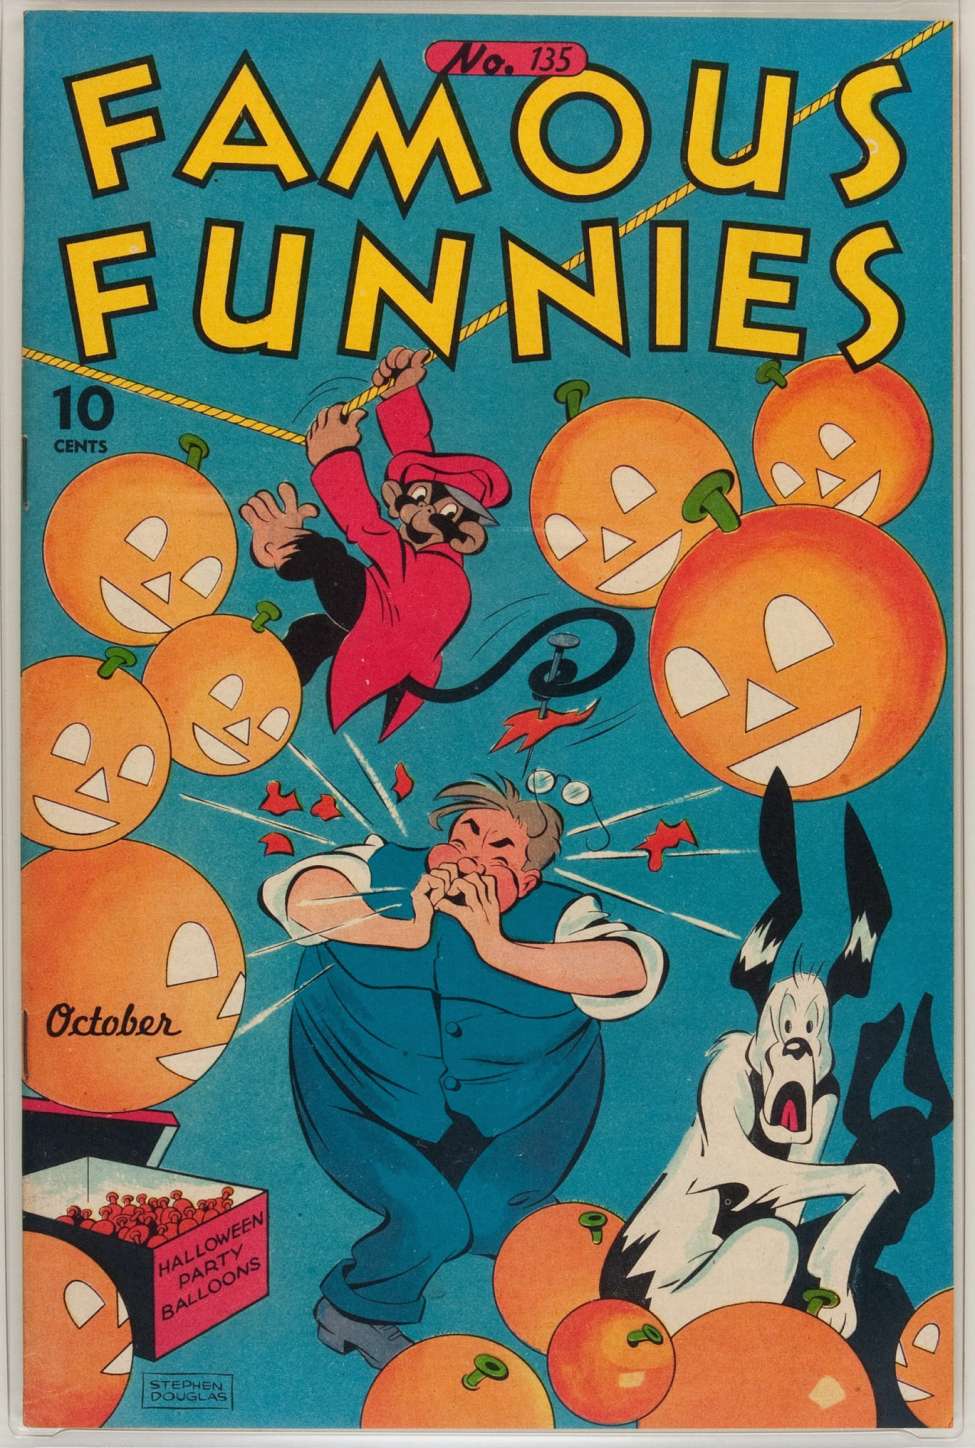 Book Cover For Famous Funnies 135